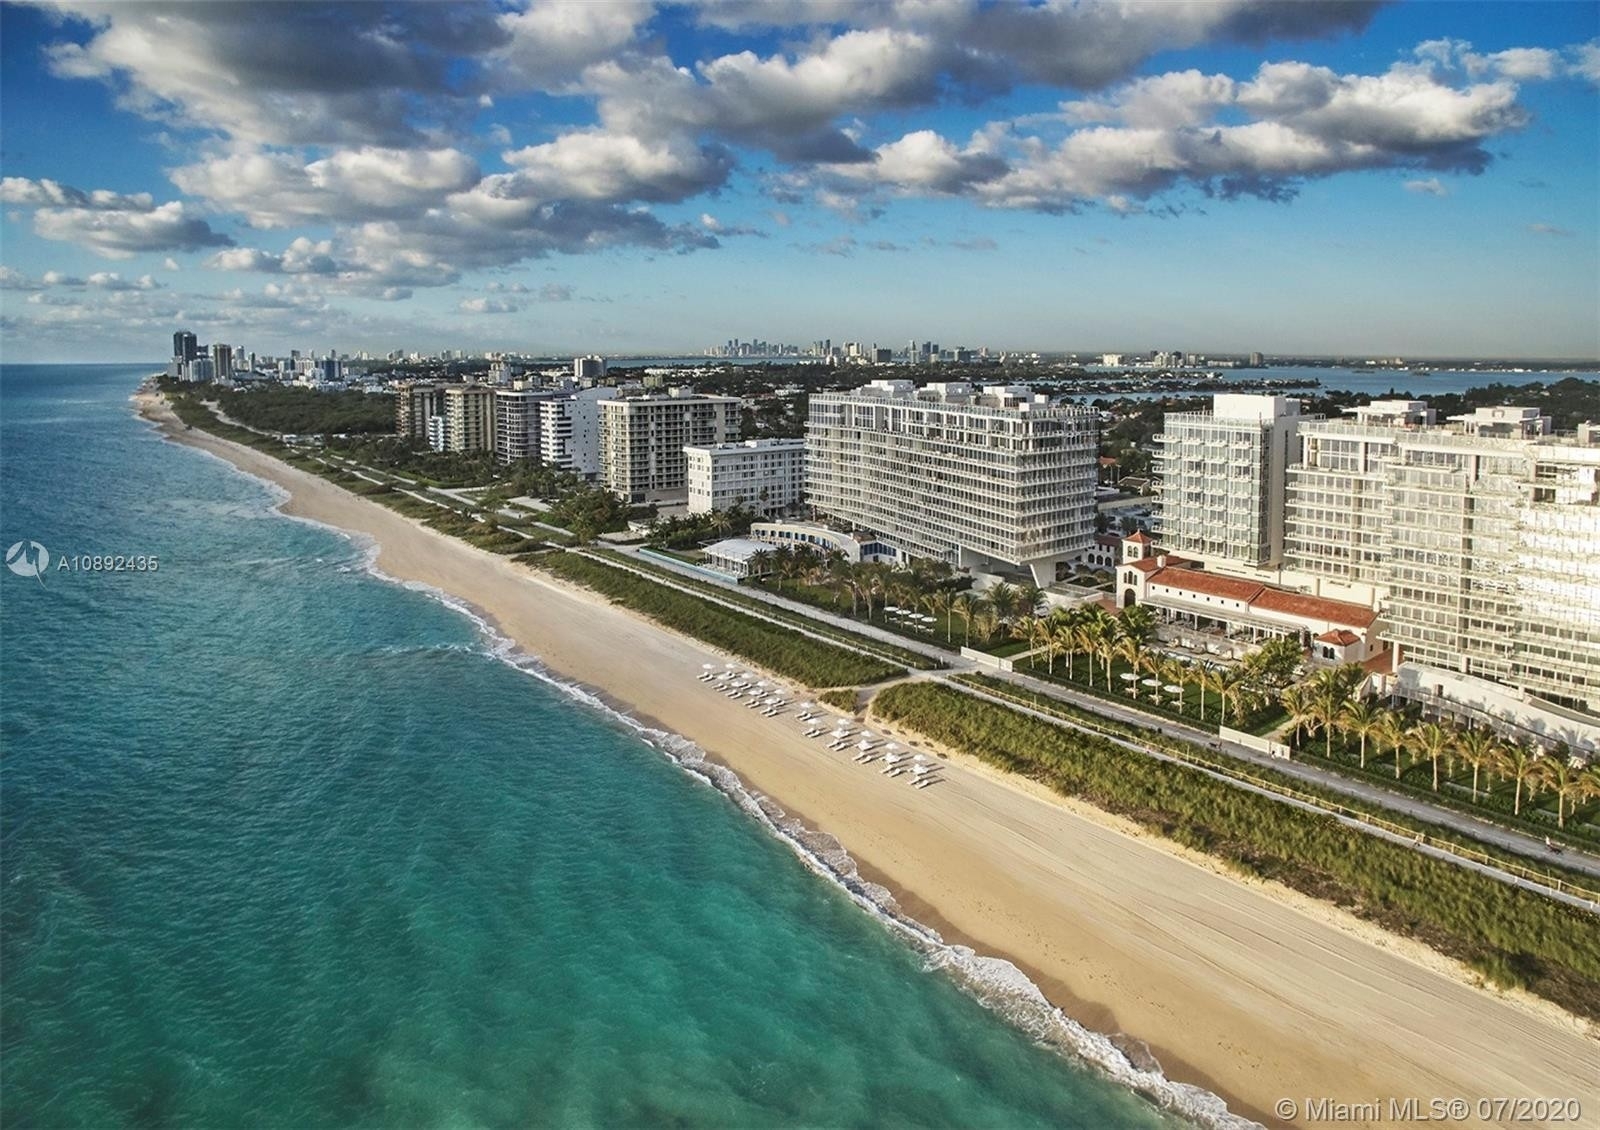 19. Condominiums at 9001 Collins Ave, S-510 Surfside